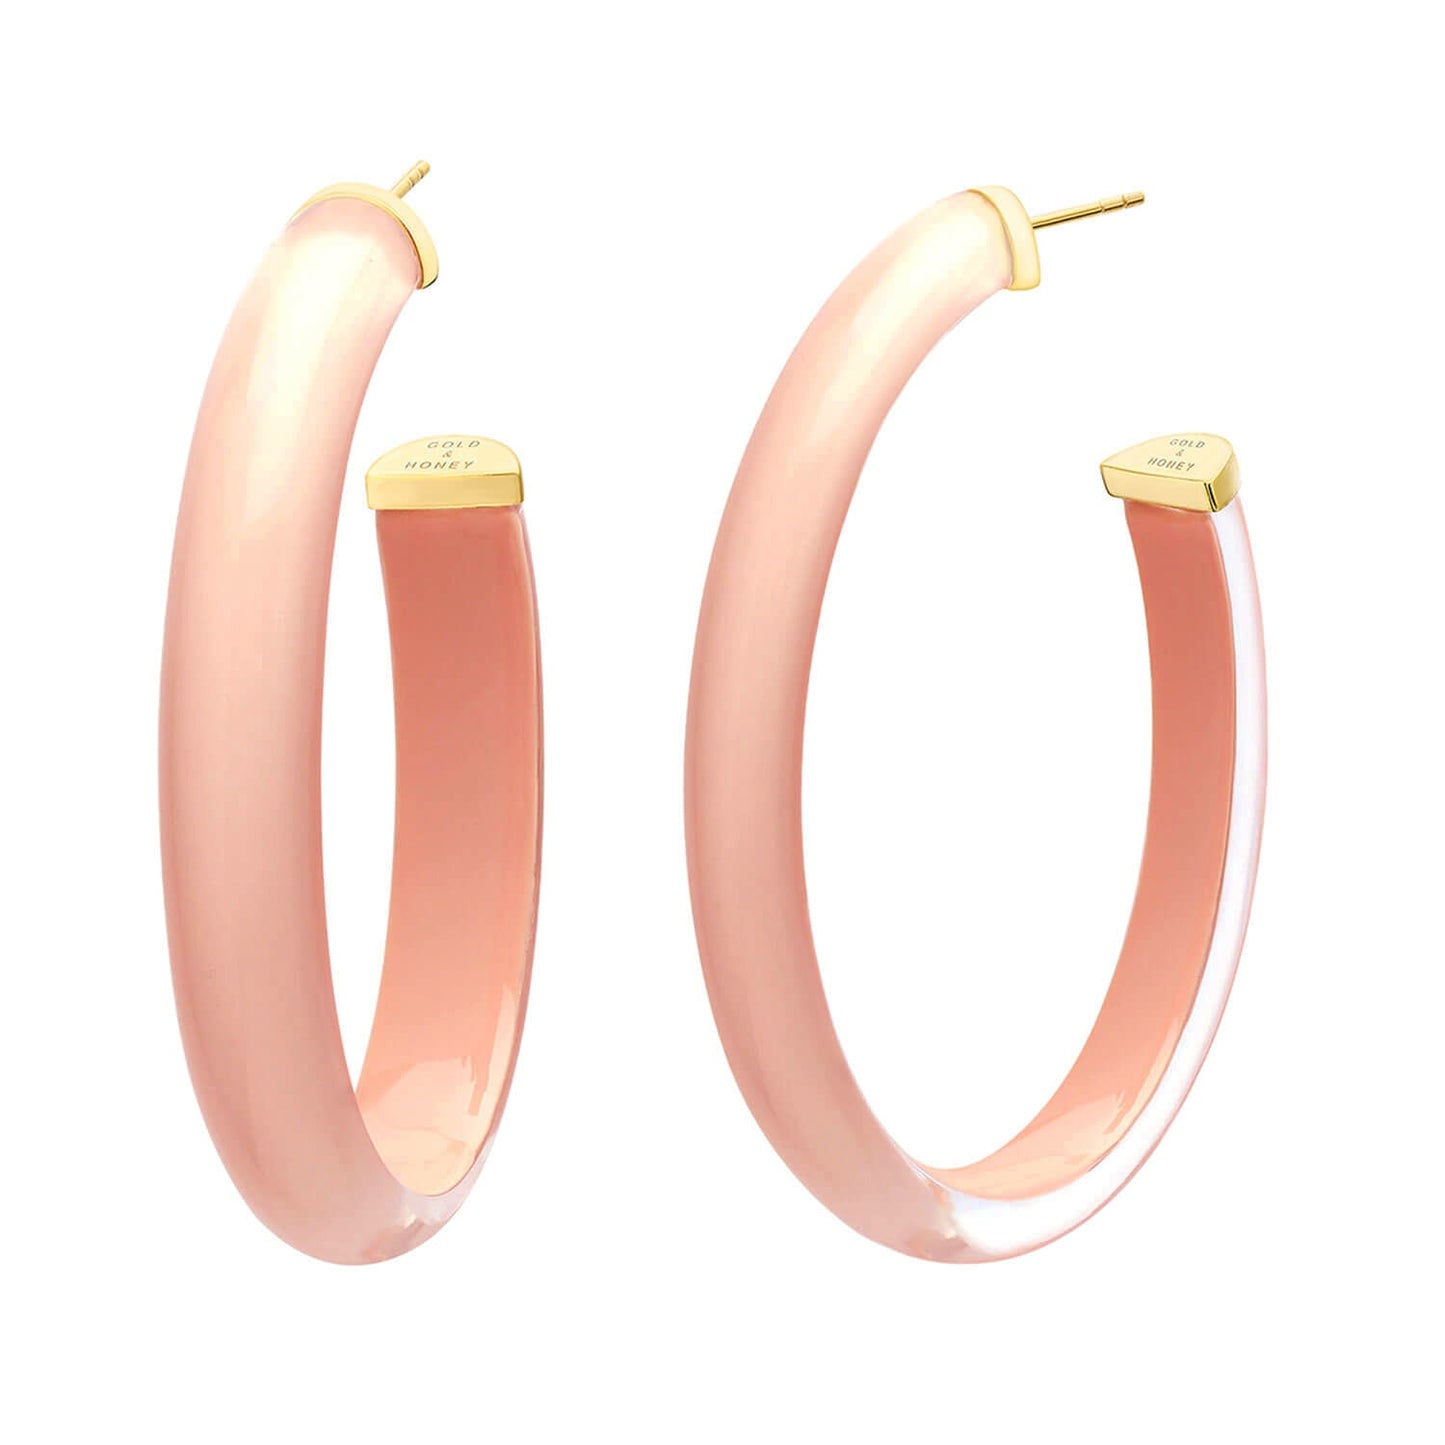 XL Oval Illusion Neutral Lucite Hoop Earrings